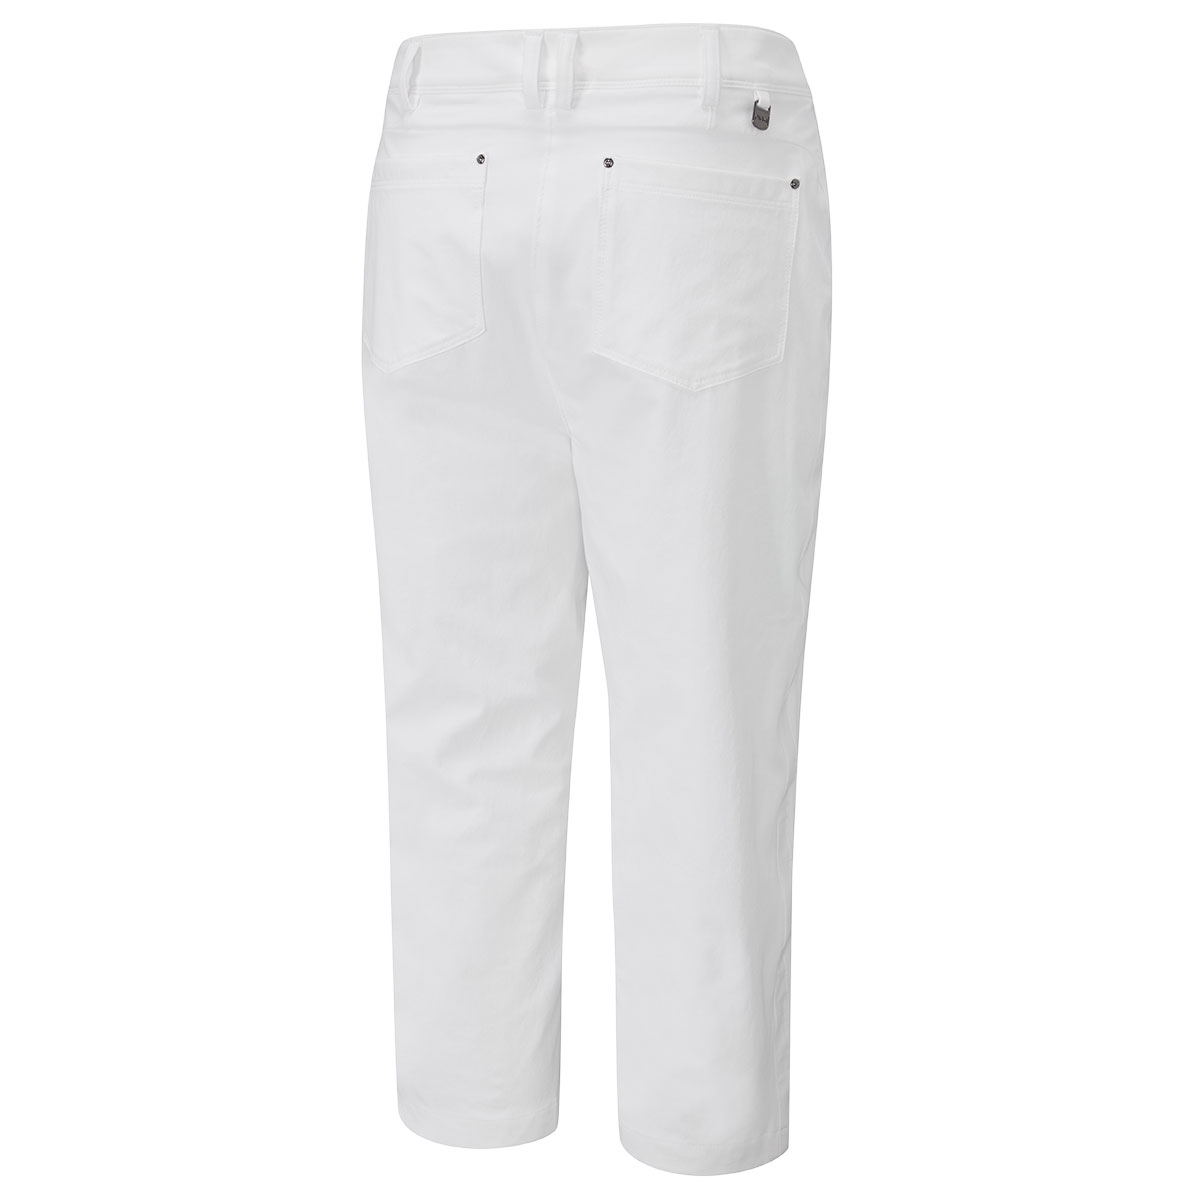 Ping Winter Golf Trousers  electricmallcomng